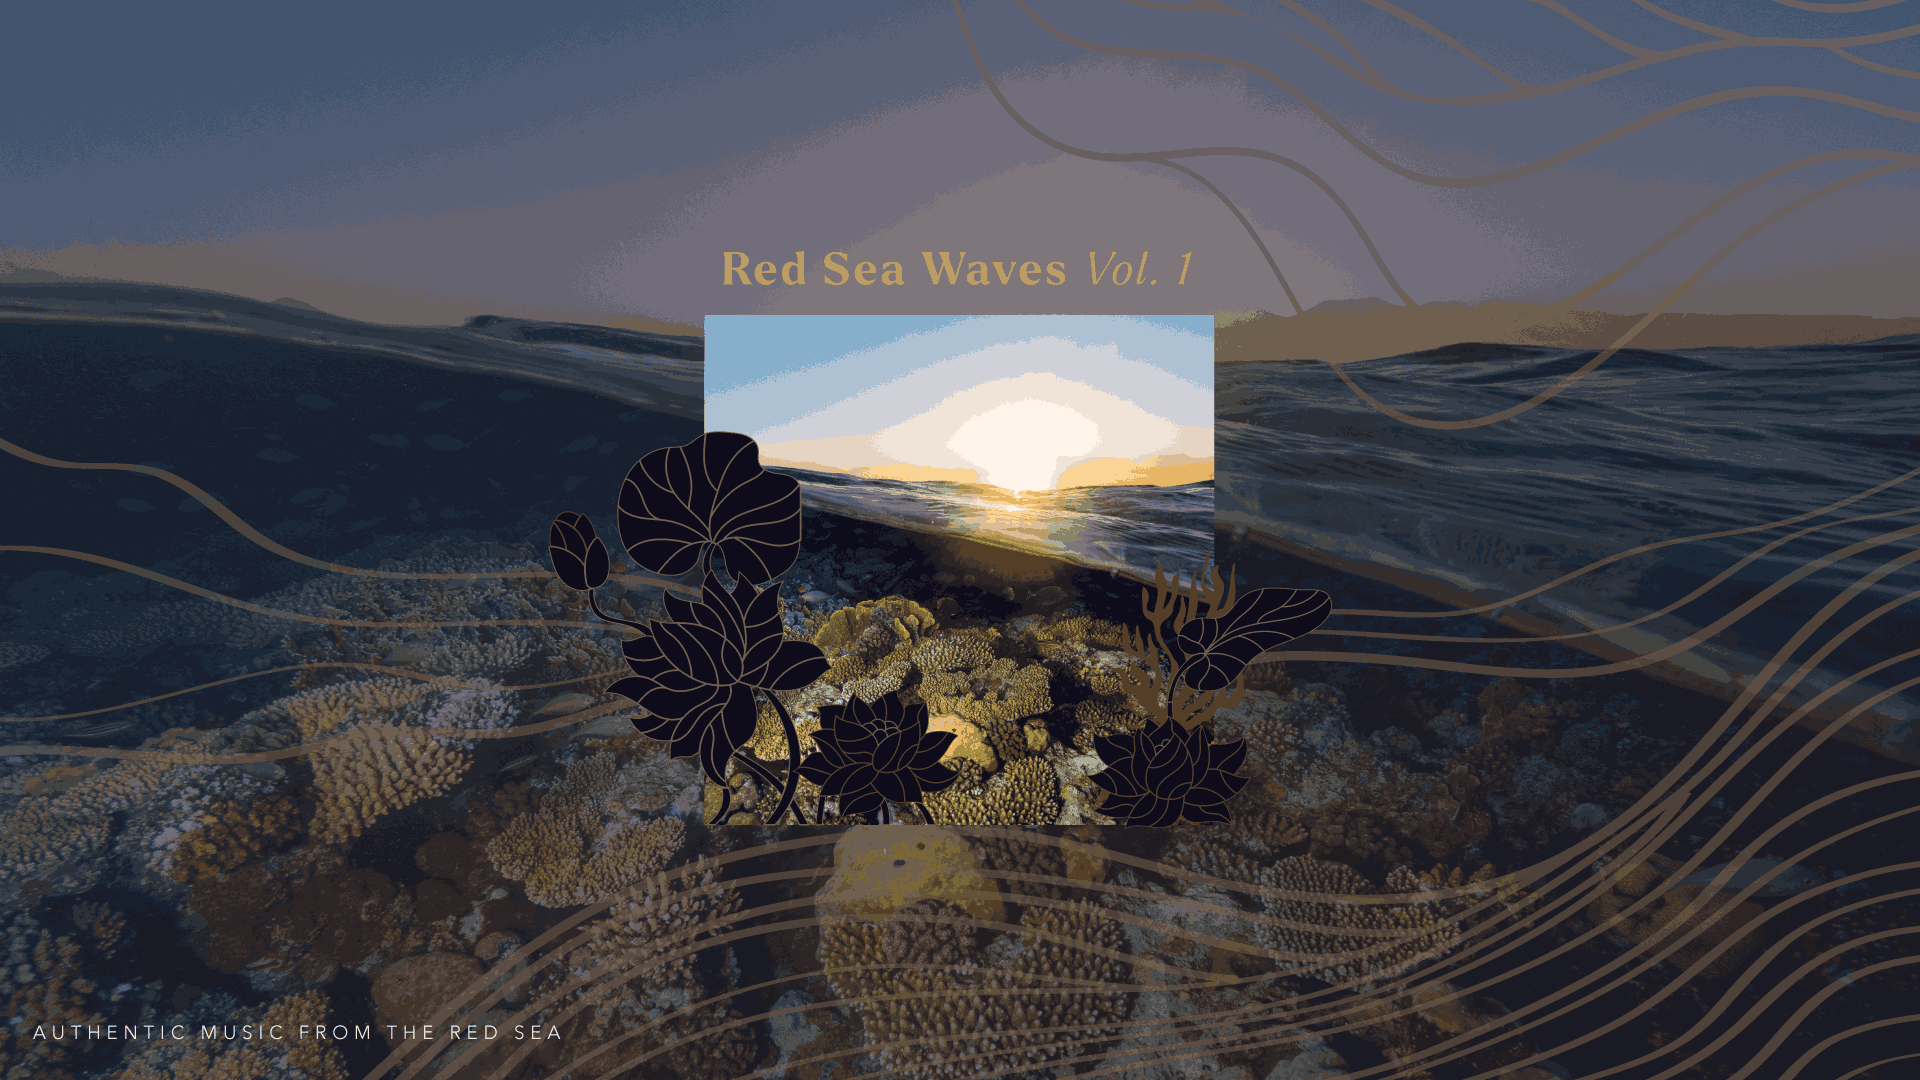 Red Sea Global Releases First 'Red Sea Waves' Music Album